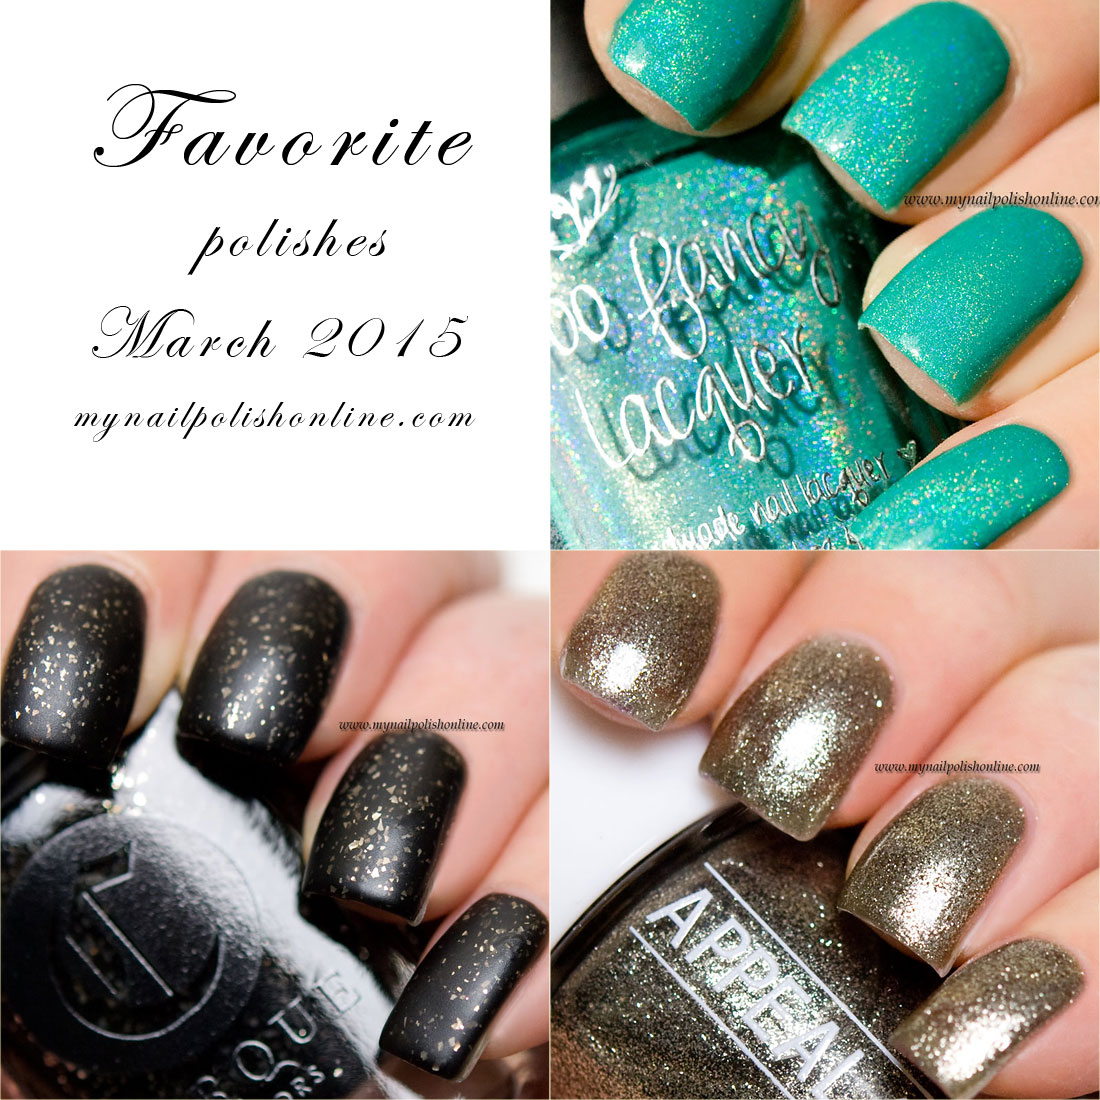 Favorite polishes March 2015